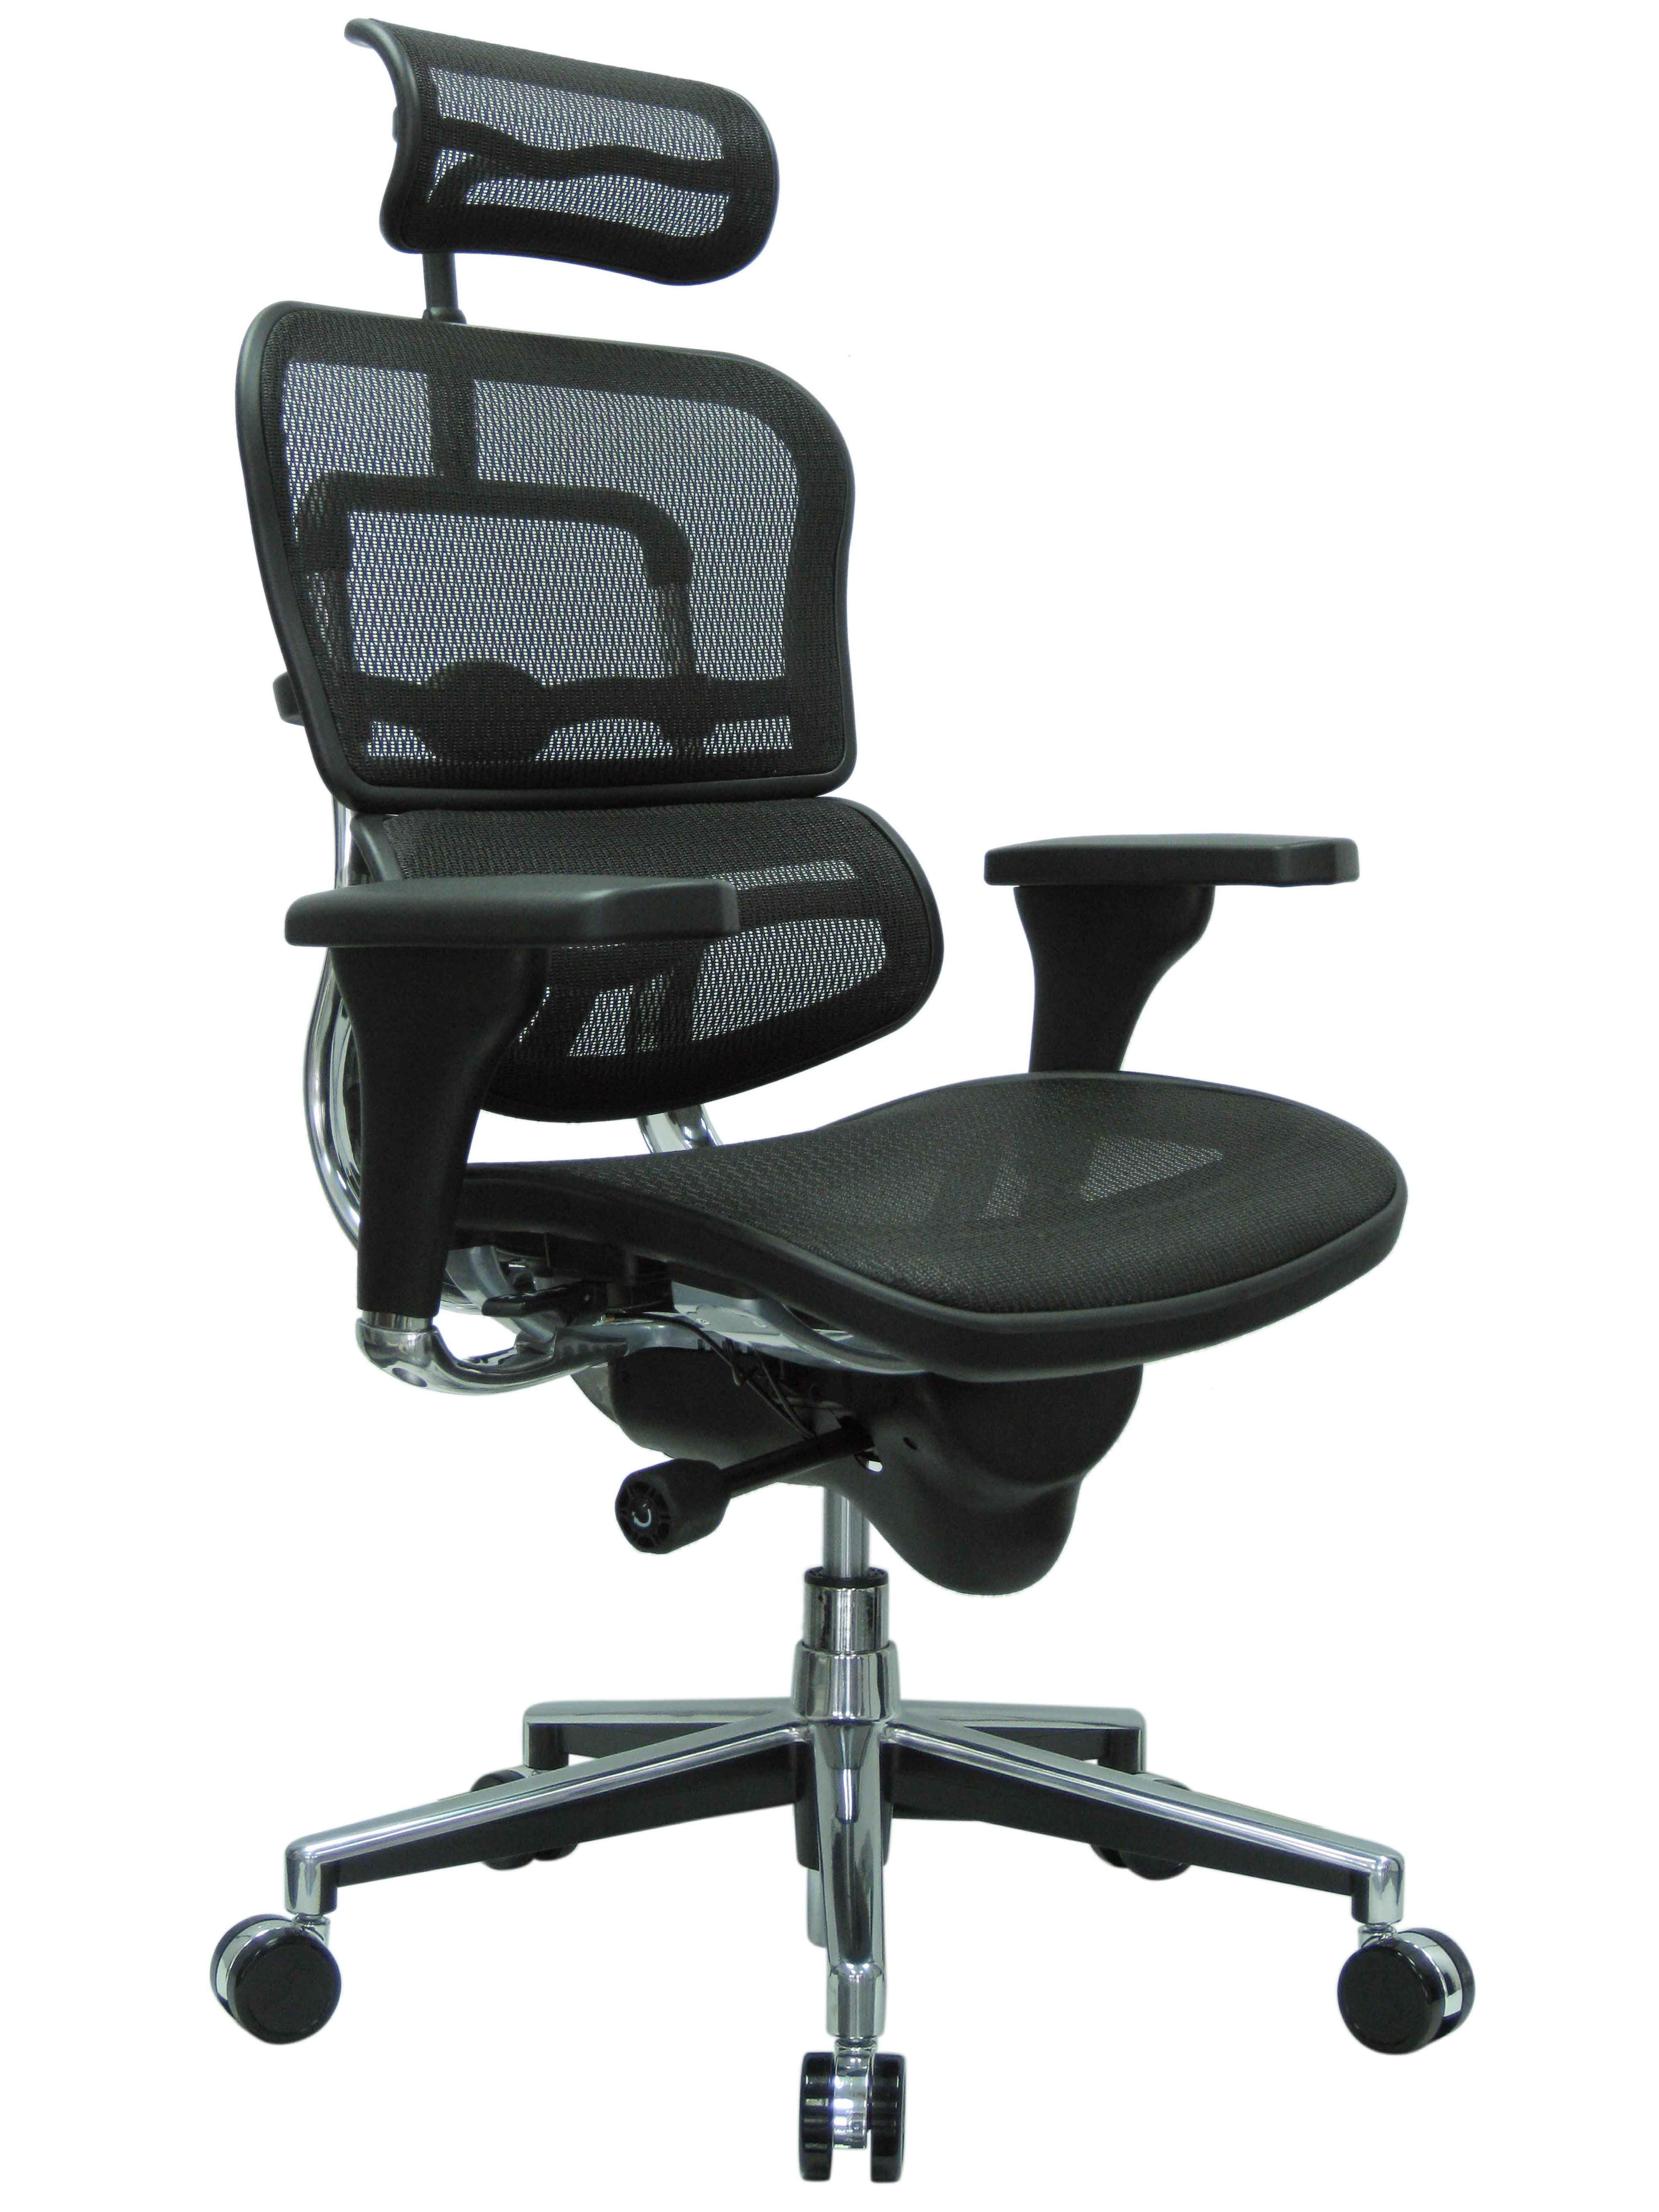 Gm Seating Ergolux Genuine Leather, Ergonomic Leather Chair By Gm Seating